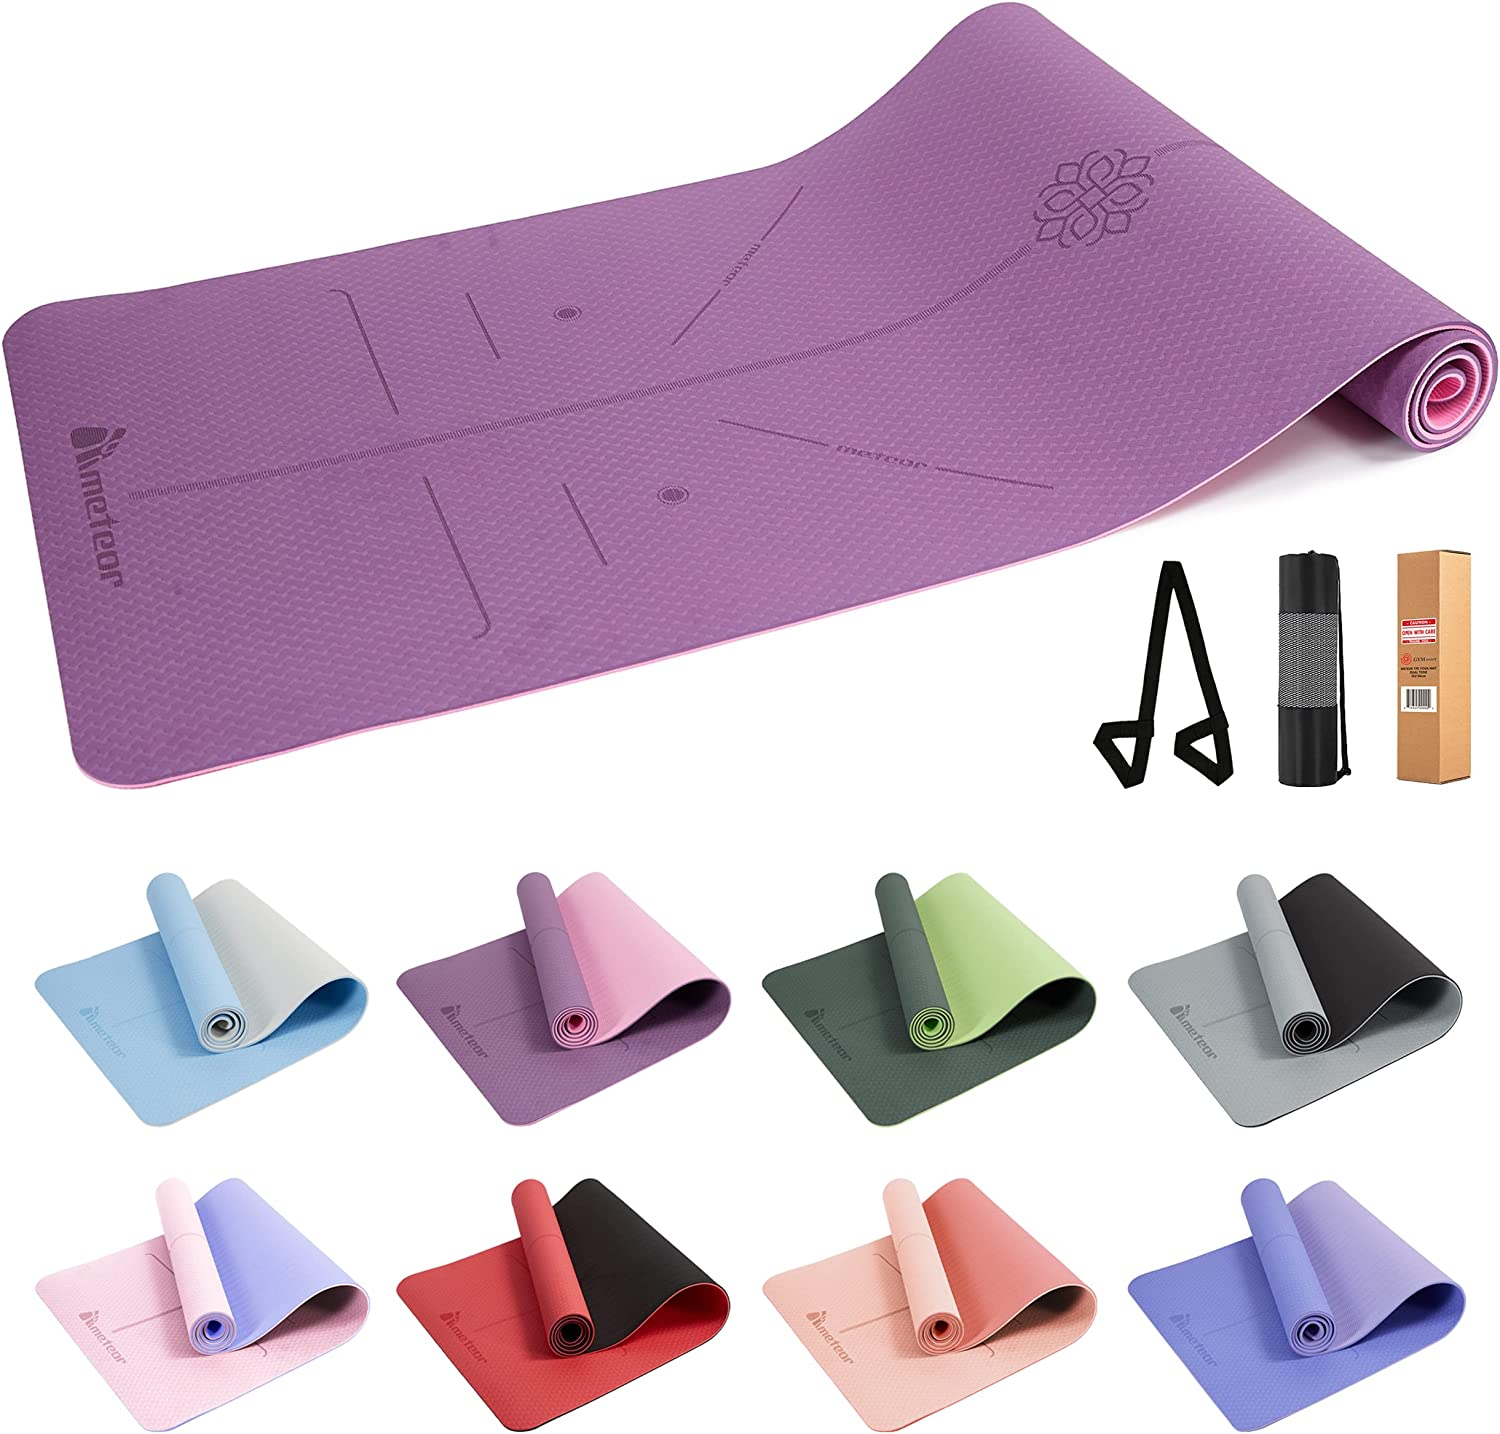 Yoga Mat with Alignment Lines, Professional Non Slip Pilates exercise Mat